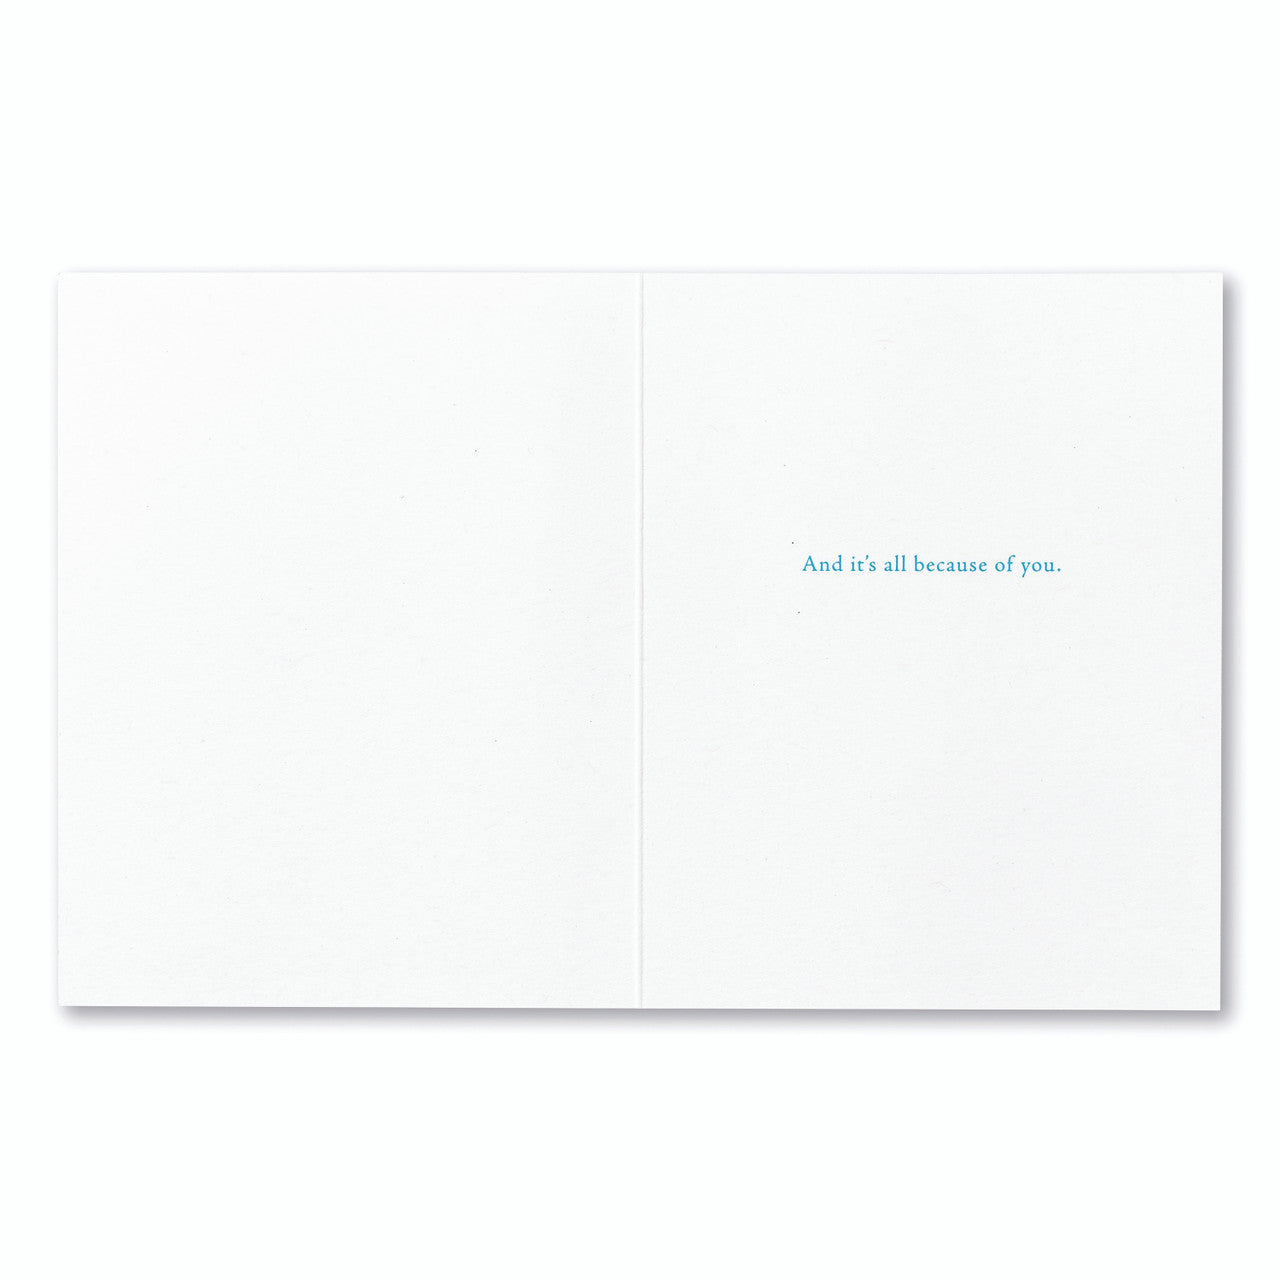 My Soul Is Swept Up In Joy -Uvavnuk - Thank You Greeting Card - Mellow Monkey